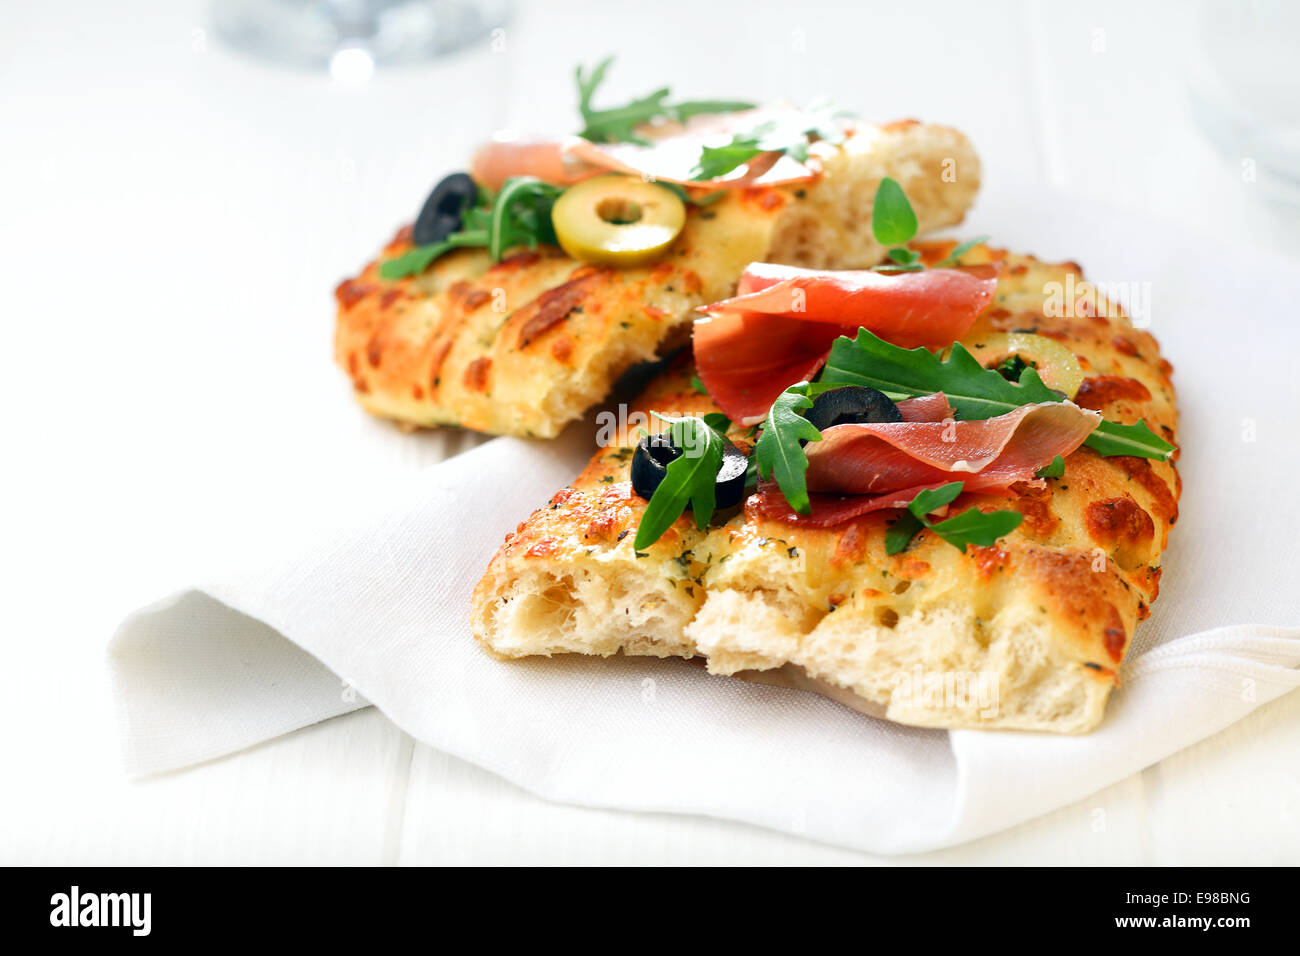 Fresh oven-baked golden focaccia bread with ham, sliced olives and fresh rocket leaves served on a white napkin Stock Photo